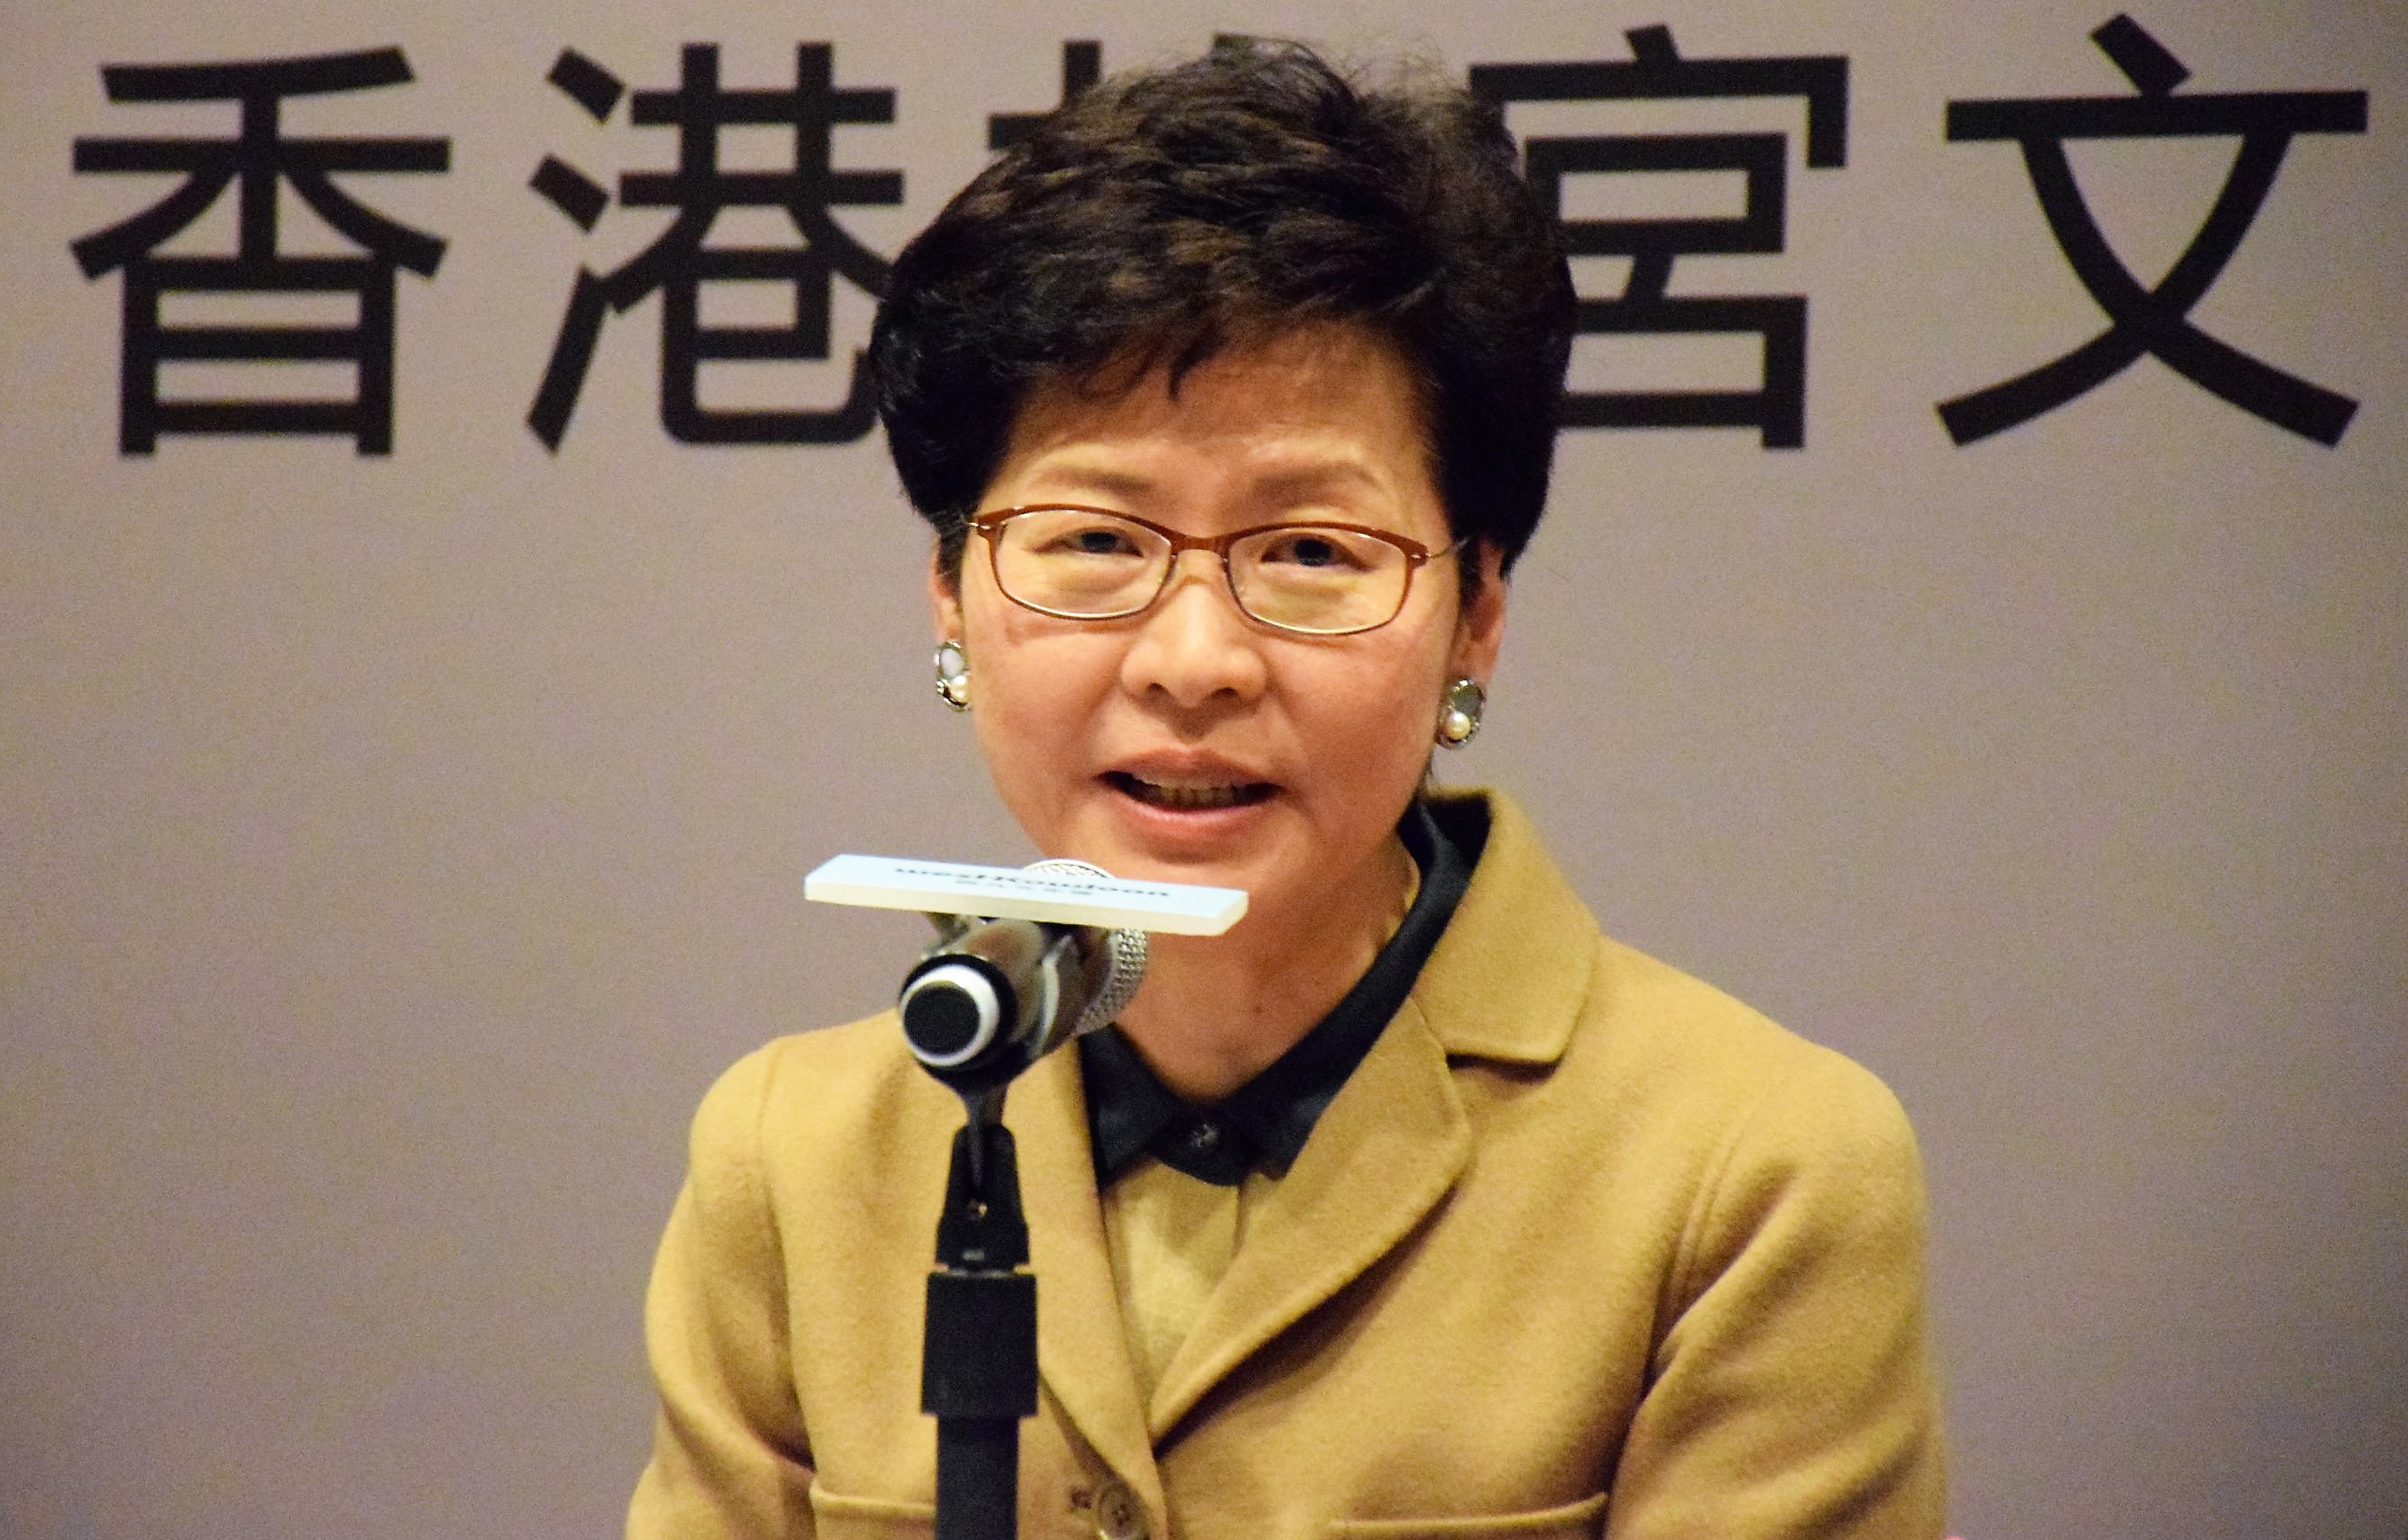 Hong Kong extradition bill is dead: Carrie Lam